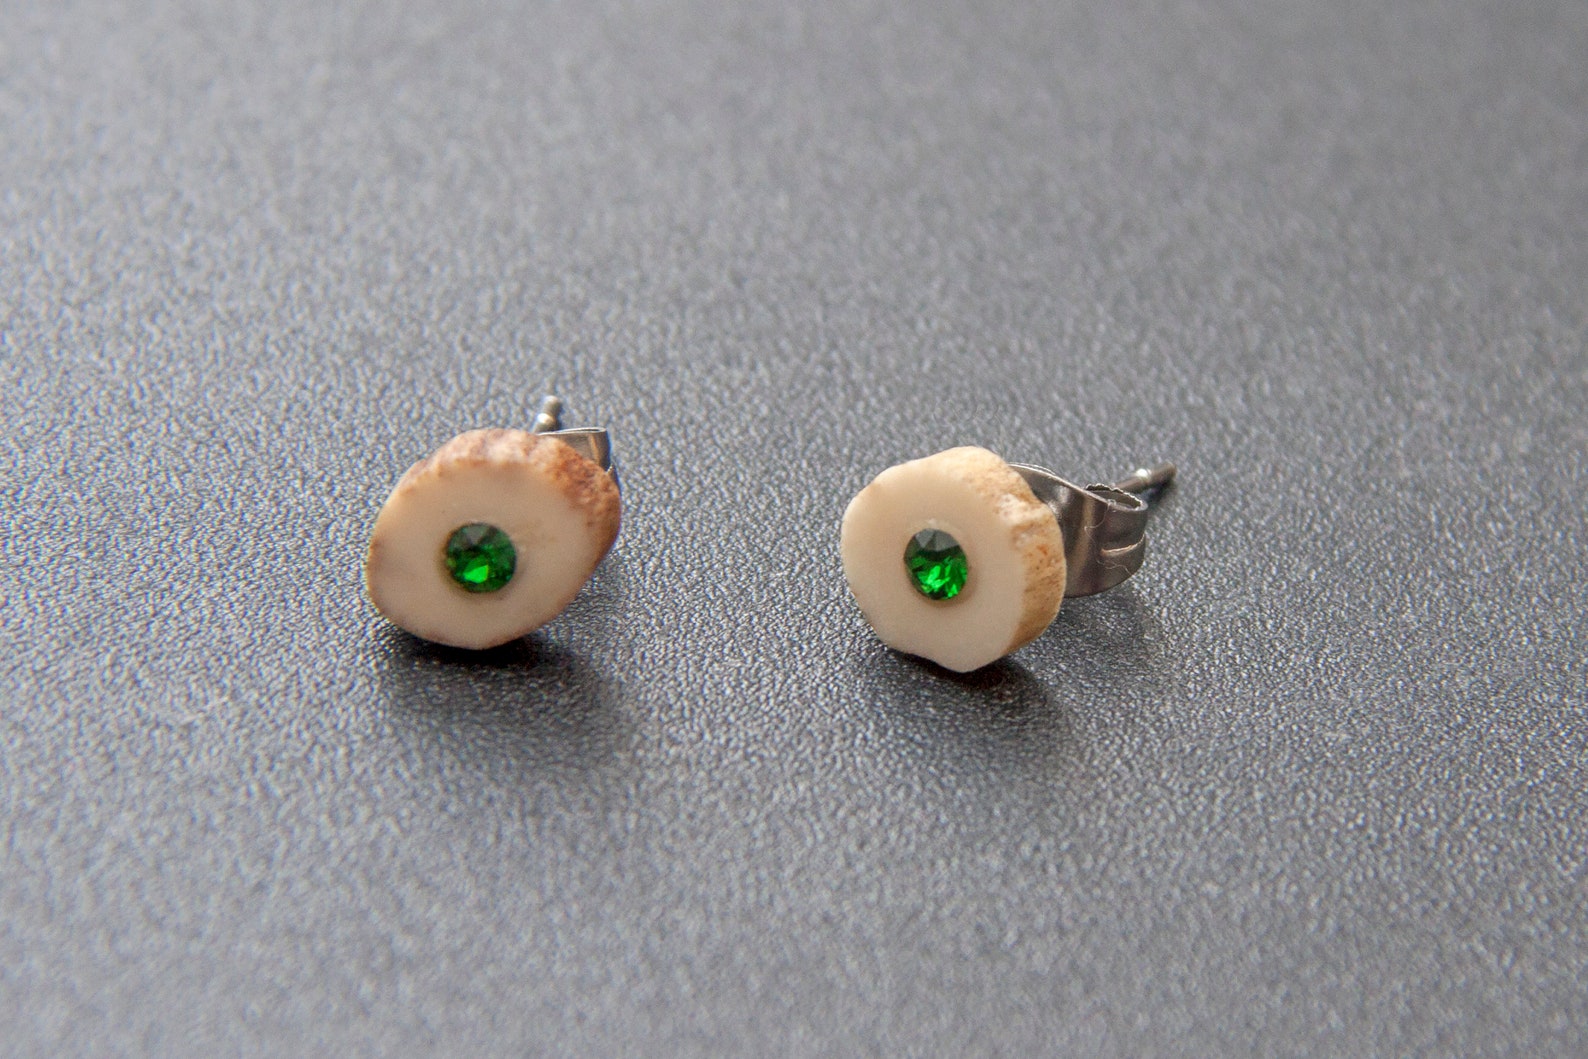 Dots - stud earrings made of deer antler, Swarovski crystals and stainless steel, Gift wrapping included